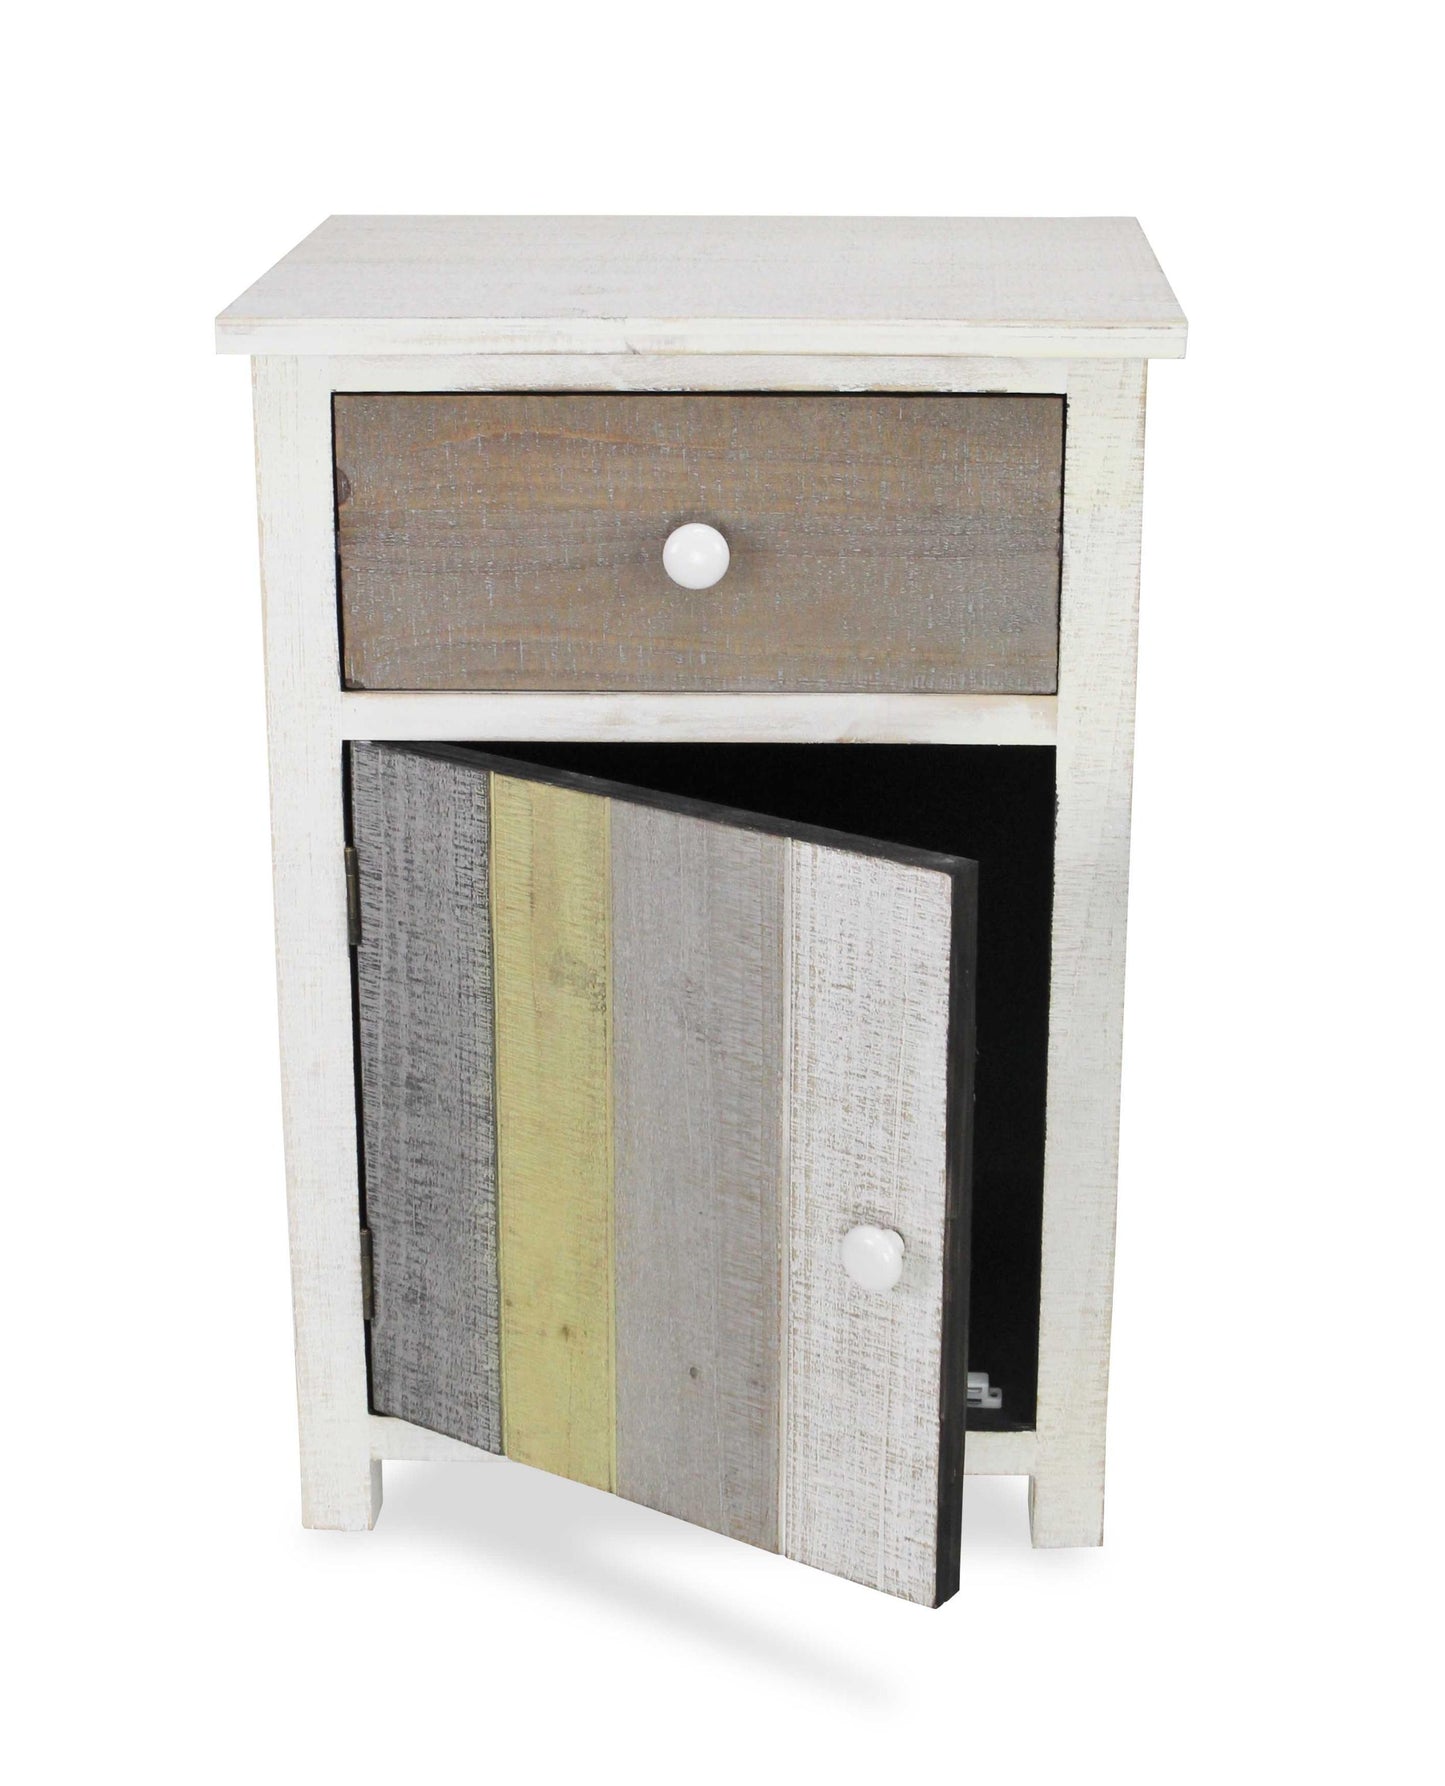 Rustic Distressed White Nightstand with Natural Gray and Green Accents